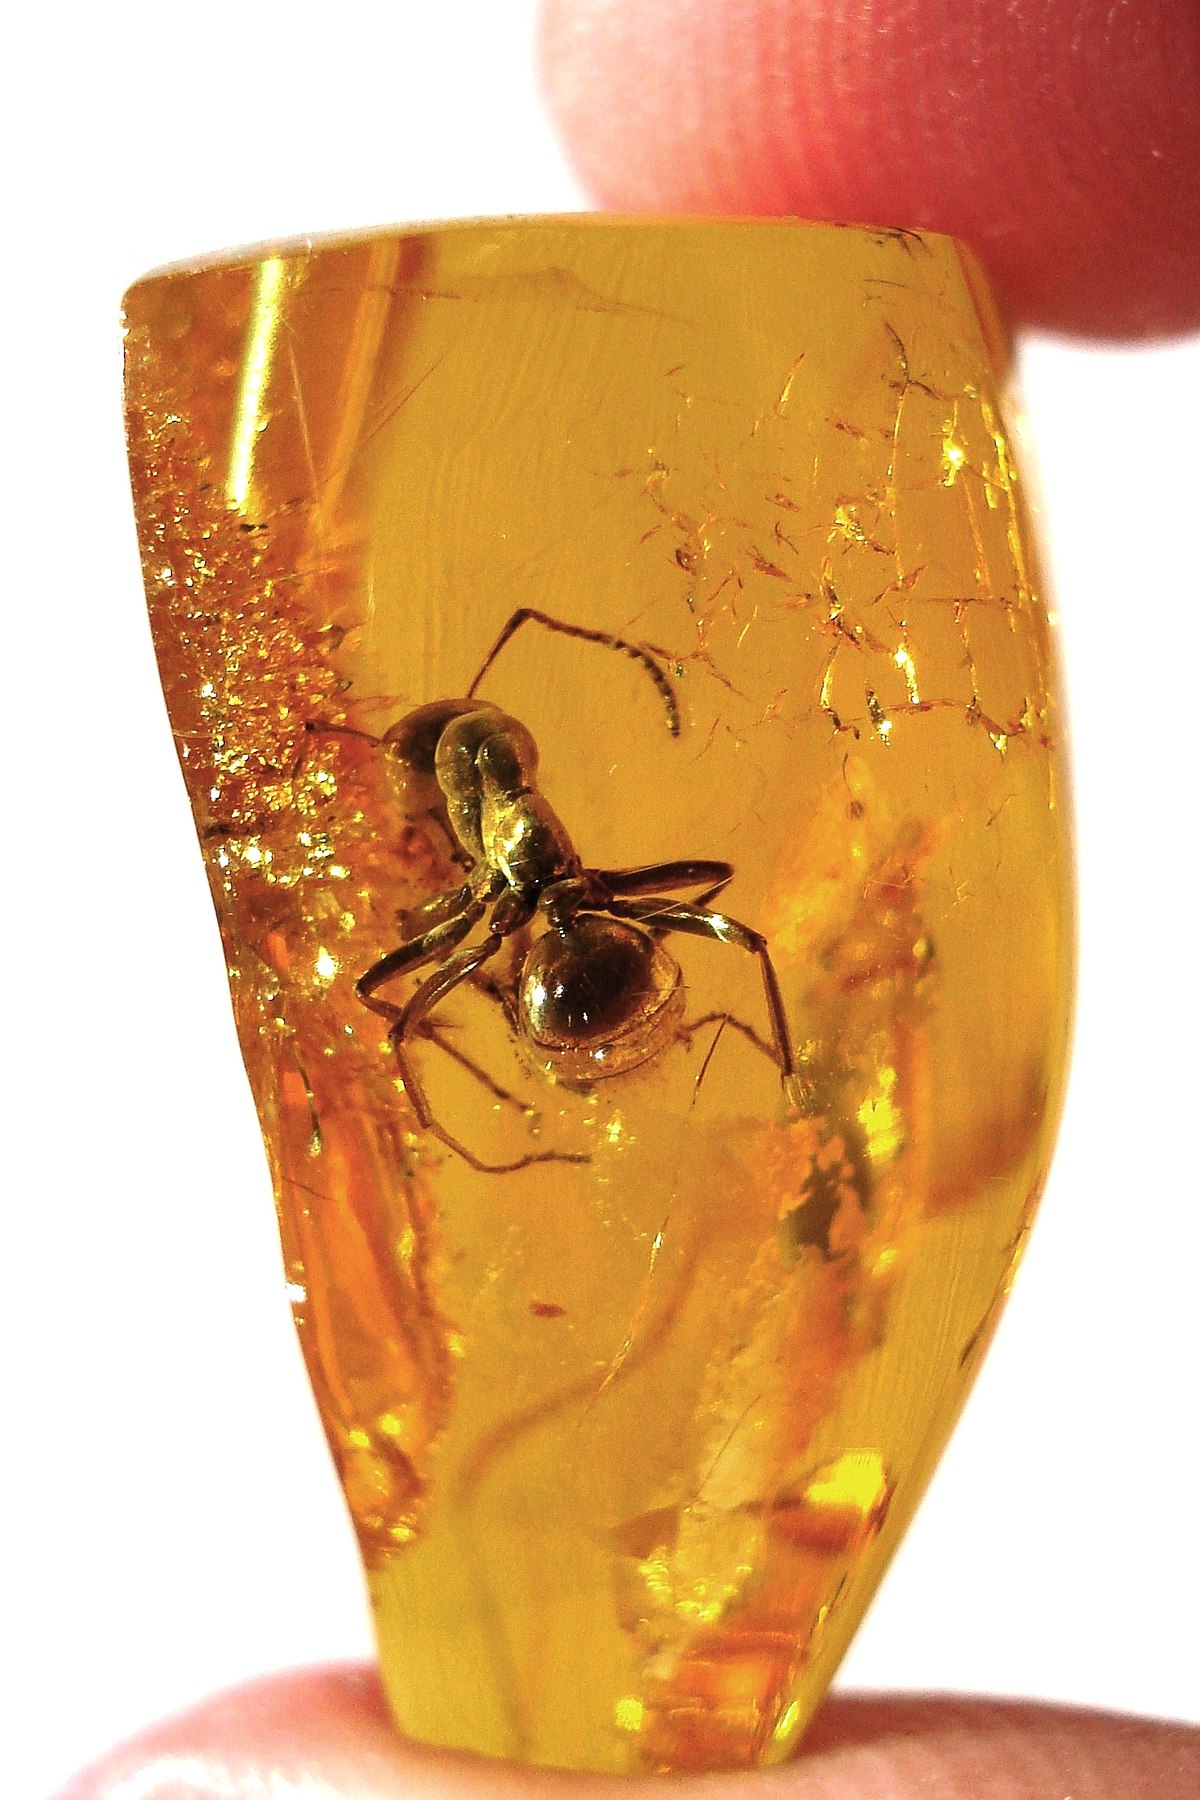 Spider in amber